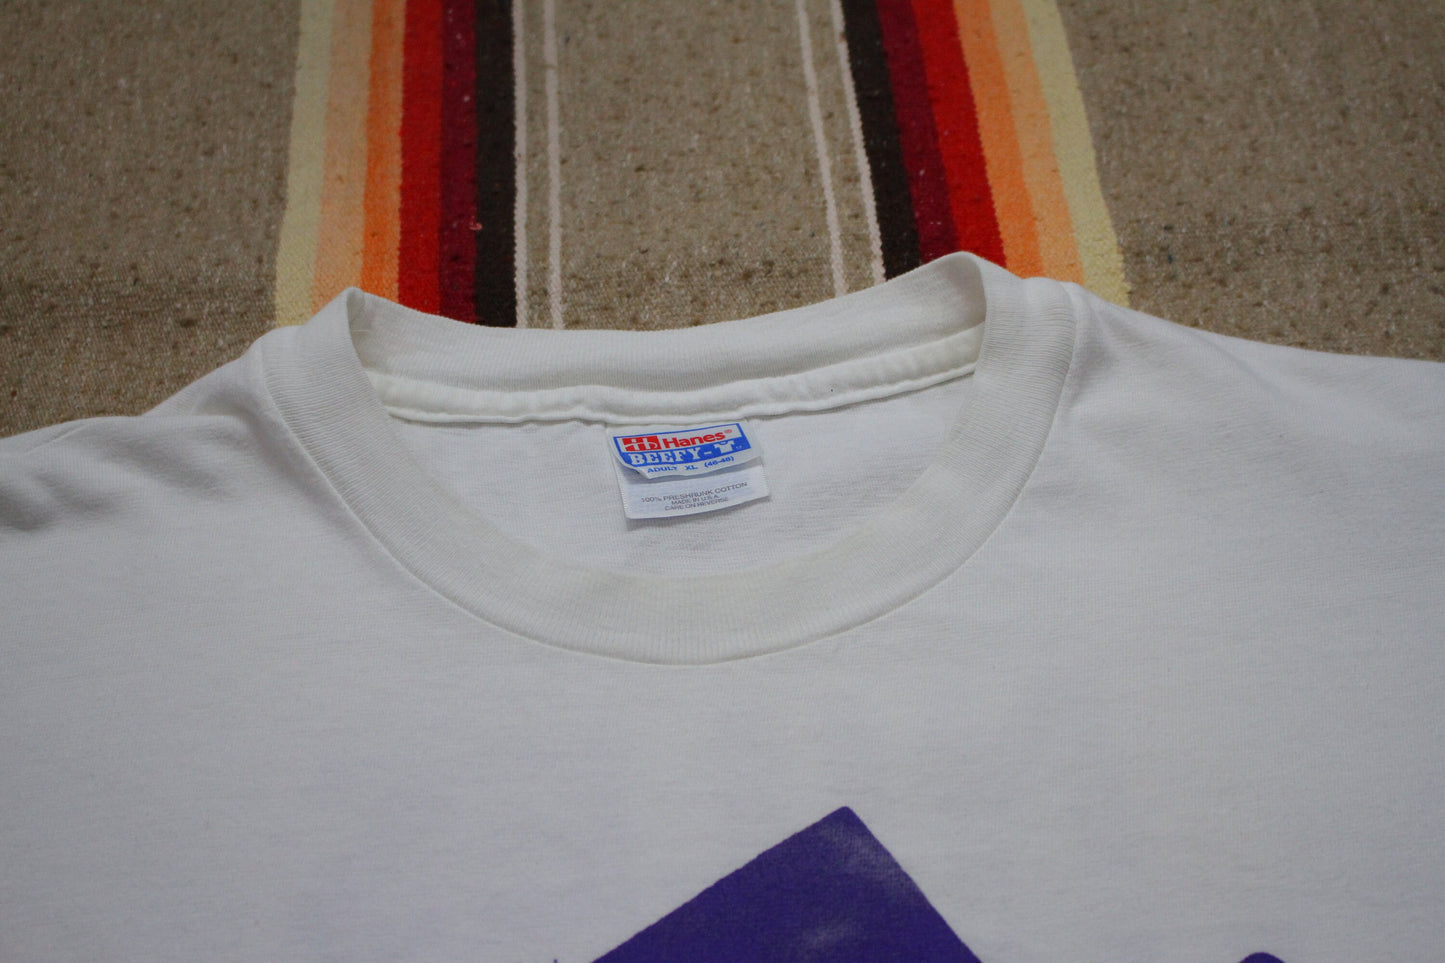 1990s 1995 Hanes Niles North Tennis High School Stokie Illinois T-Shirt Made in USA Size XL